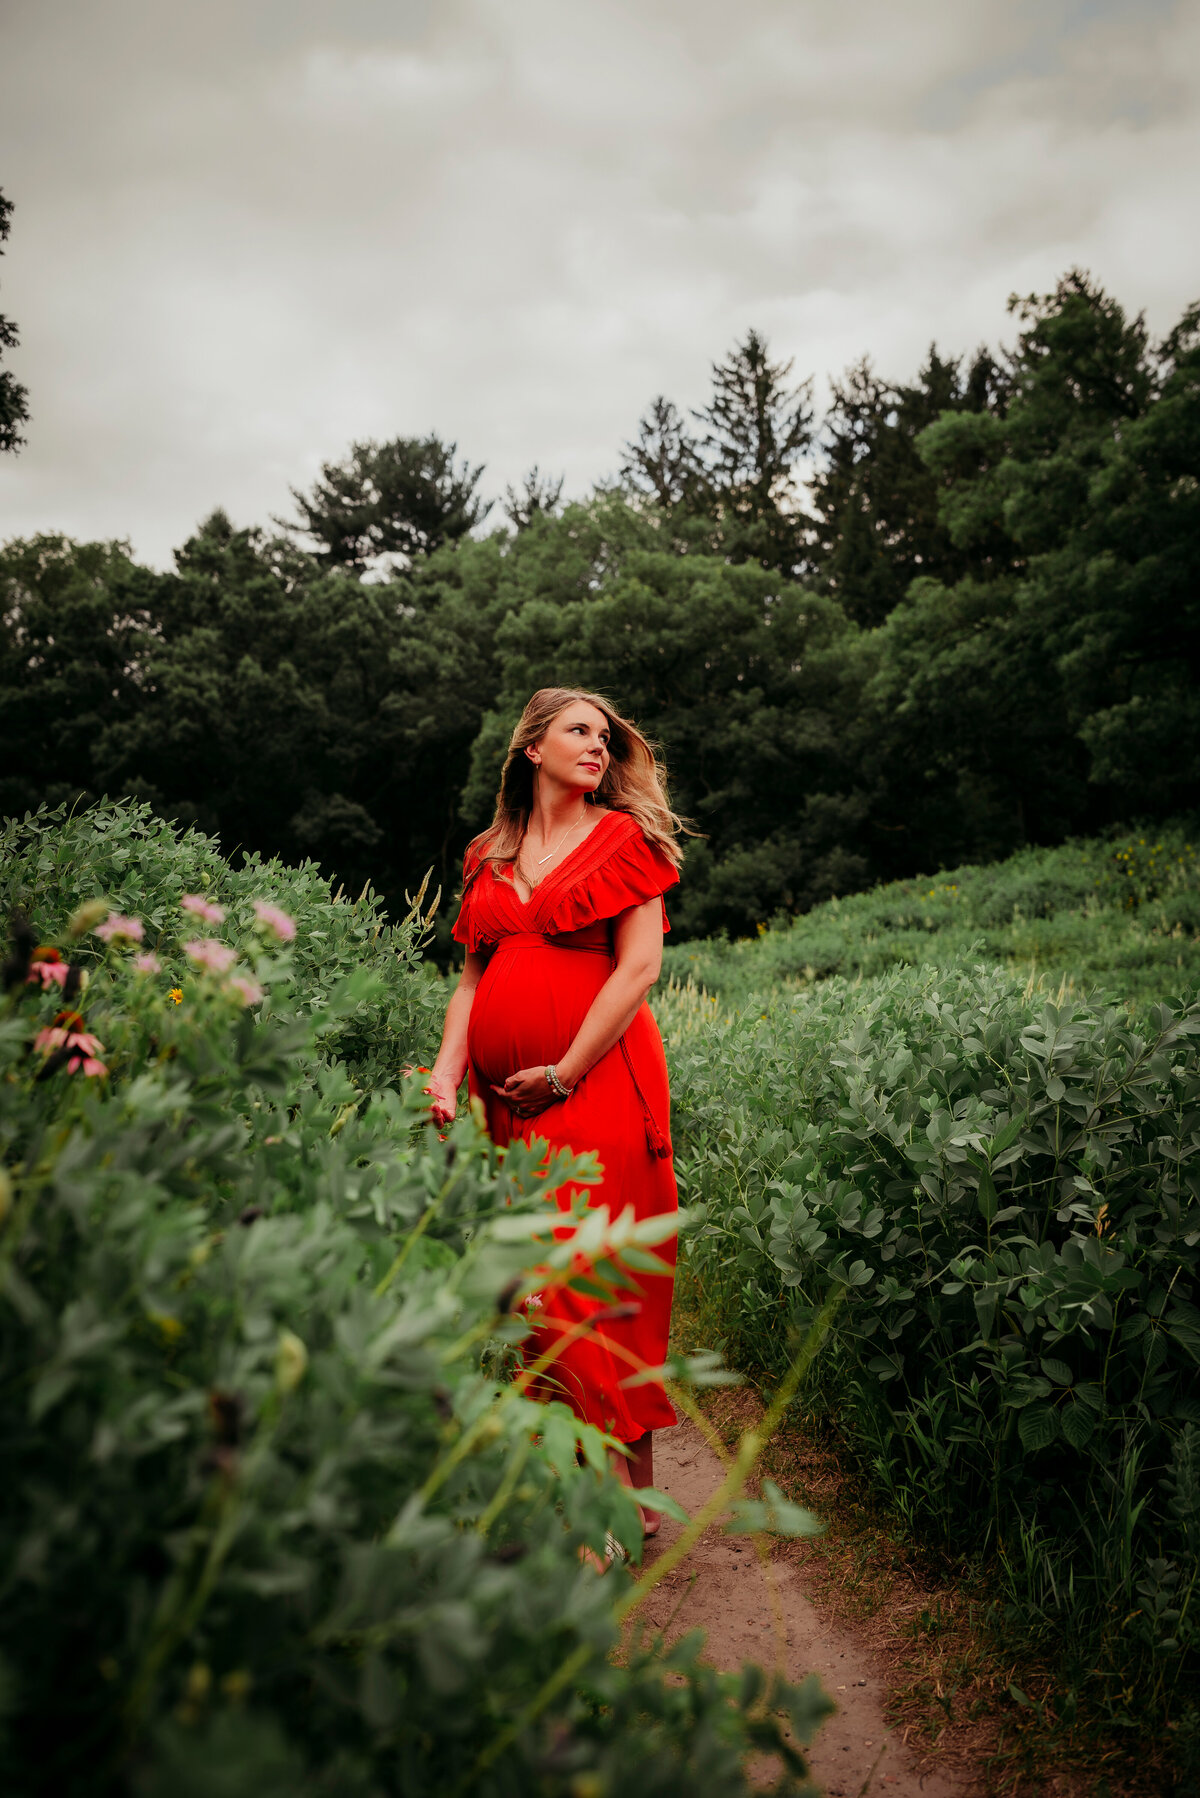 Dream amidst meadow serenity in our outdoor maternity sessions. Shannon Kathleen Photography paints your dreams with the natural beauty of maternity. Schedule your session.